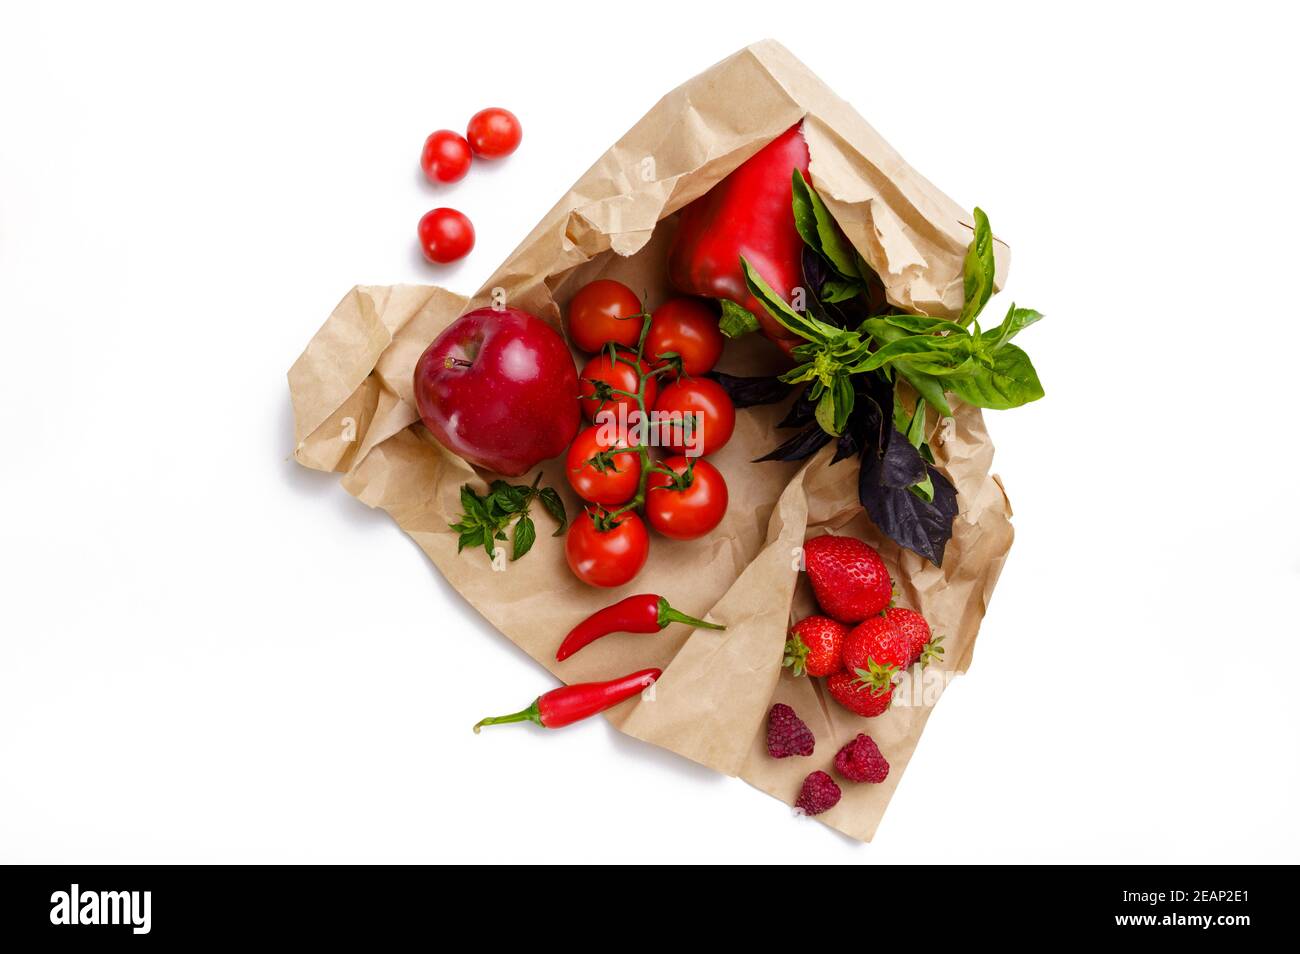 Raw vegetables and fruits in cotton package Stock Photo